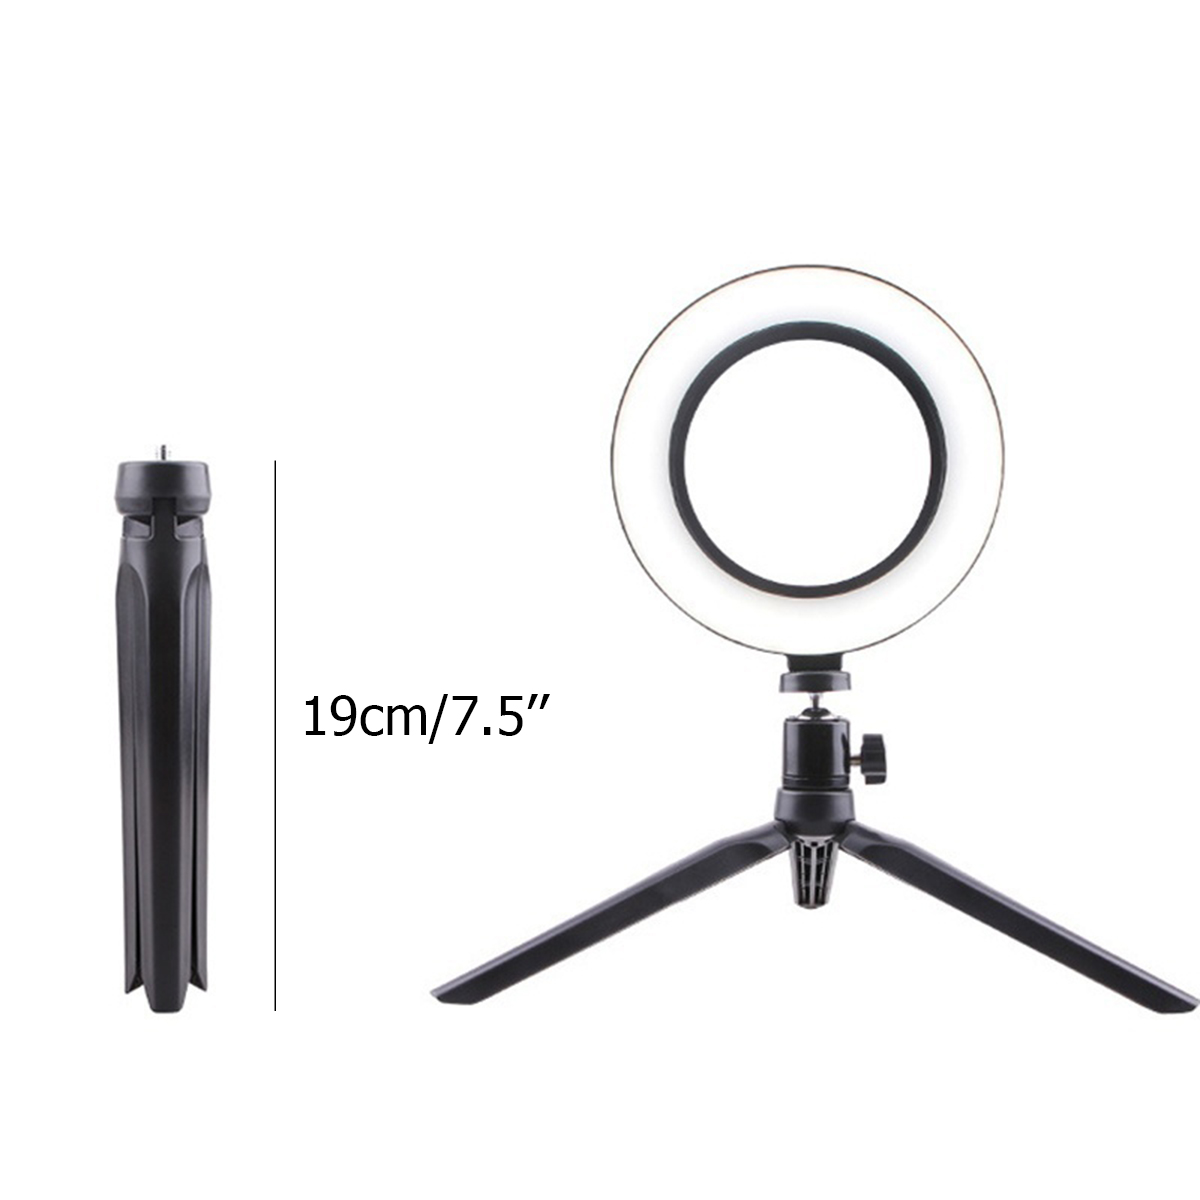 Portable-Ring-Light-LED-Makeup-Ring-Lamp-USB-Selfie-Ring-Lamp-Phone-Holder-Tripod-Stand-Photography--1579954-10